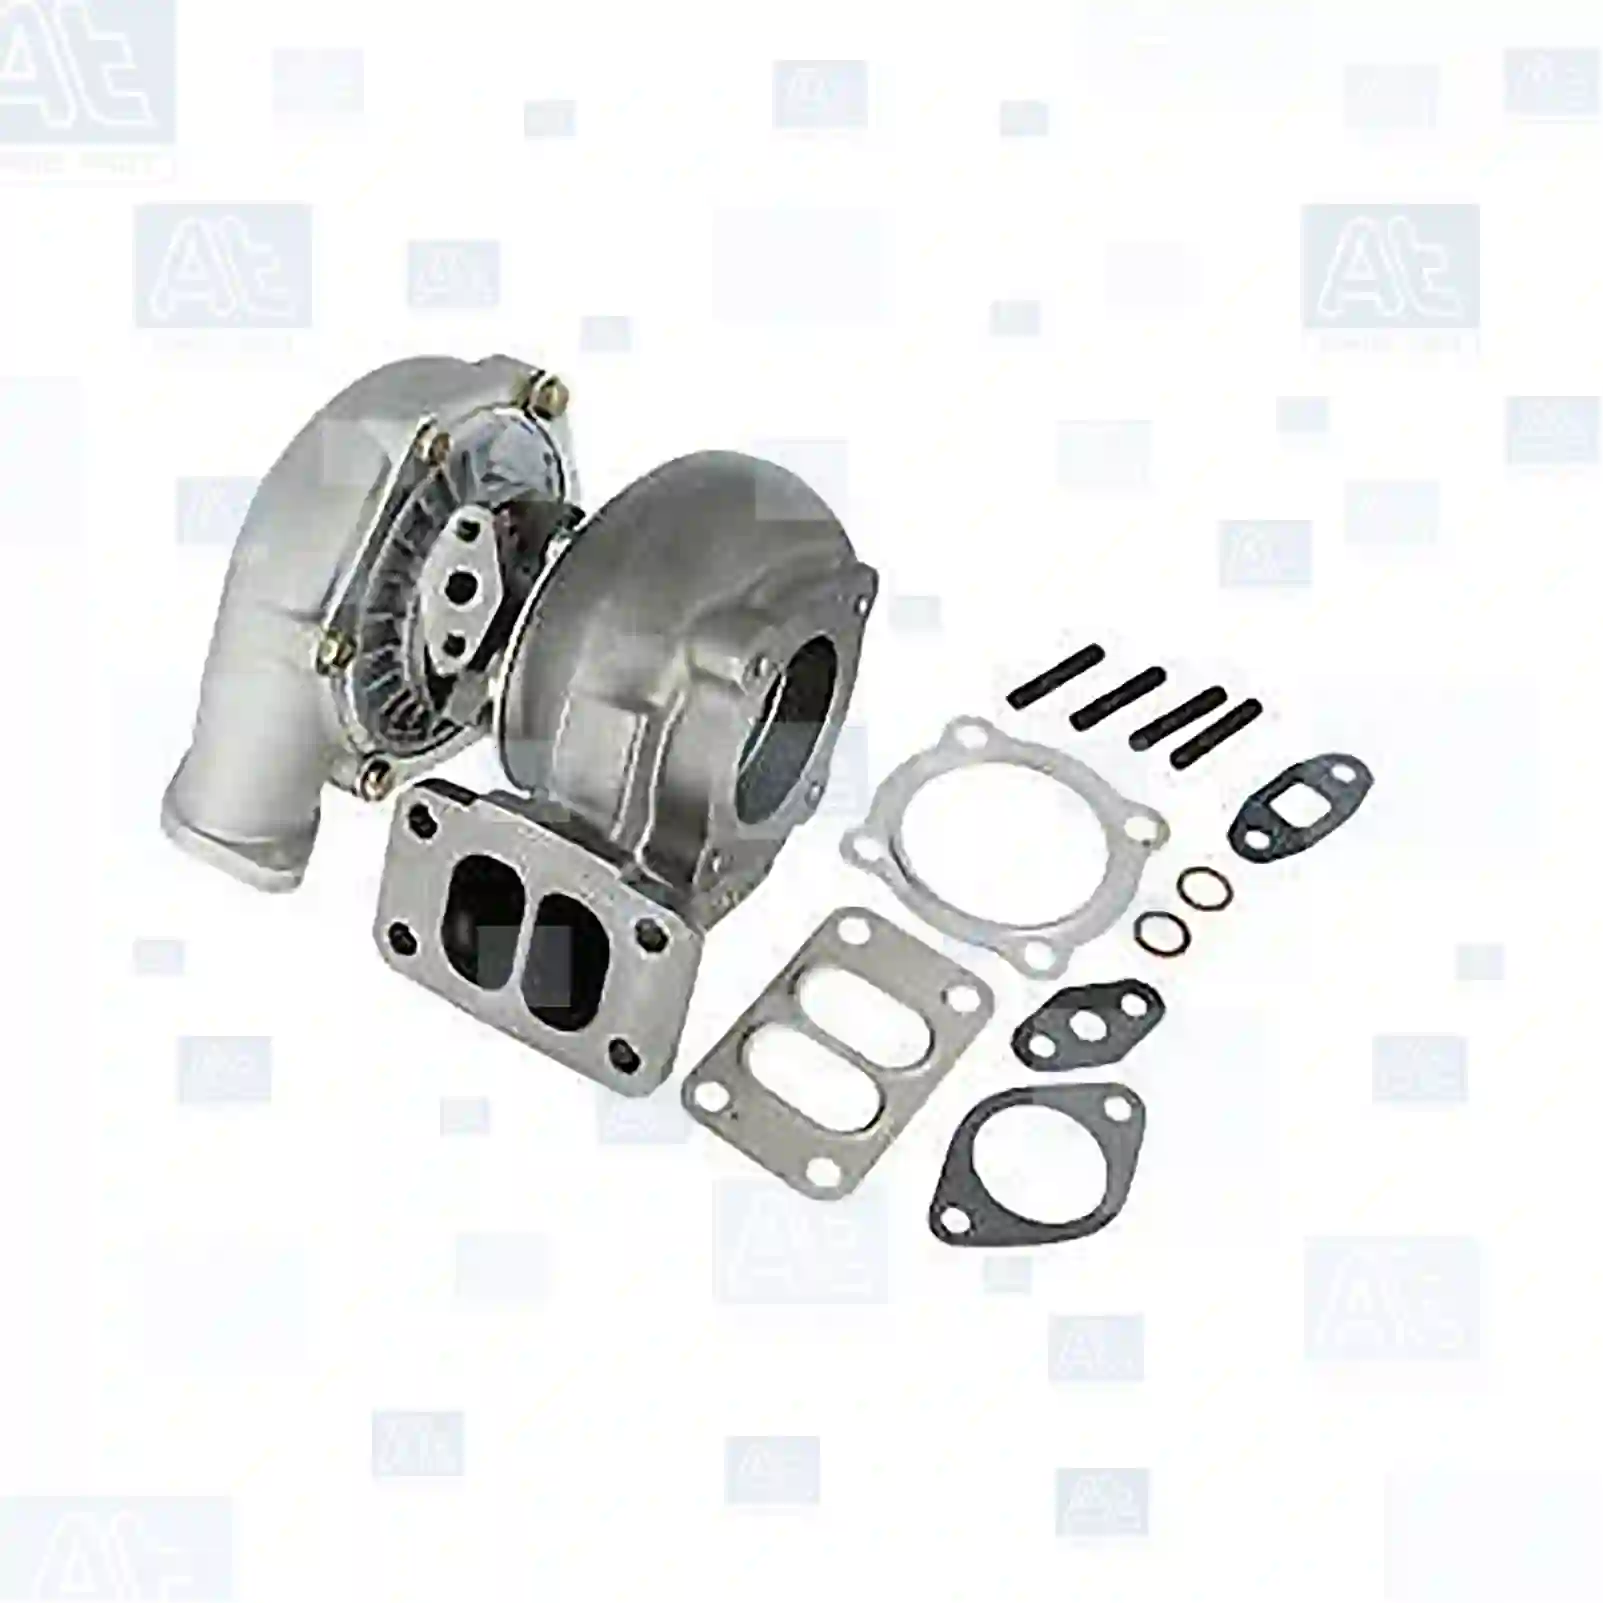 Turbocharger, with gasket kit, 77700117, 3251119699, 3520961599, 3520961699, 3520962199, 3520962399, 3520962599, 3520962699, 3520962799, 3520962999, 3520963099, 3520963199, 3520963299, 3520963399, 3520963499, 3520963599, 3520963699, 3520963799, 3520964499, 3520964599, 3520964699, 3520964799, 3520965499, 3520965599, 3520965699, 3520965799, 3520965899, 3520965999, 3520966099, 3520966199, 3520967199, 352096719980, 3520967299, 3520967399, 3520967499, 3520967799, 3521123599, 3521209599, 3521209699, 3521215799, 3521215899, 3520962526, 3520962527, 3520962529, 3520962530 ||  77700117 At Spare Part | Engine, Accelerator Pedal, Camshaft, Connecting Rod, Crankcase, Crankshaft, Cylinder Head, Engine Suspension Mountings, Exhaust Manifold, Exhaust Gas Recirculation, Filter Kits, Flywheel Housing, General Overhaul Kits, Engine, Intake Manifold, Oil Cleaner, Oil Cooler, Oil Filter, Oil Pump, Oil Sump, Piston & Liner, Sensor & Switch, Timing Case, Turbocharger, Cooling System, Belt Tensioner, Coolant Filter, Coolant Pipe, Corrosion Prevention Agent, Drive, Expansion Tank, Fan, Intercooler, Monitors & Gauges, Radiator, Thermostat, V-Belt / Timing belt, Water Pump, Fuel System, Electronical Injector Unit, Feed Pump, Fuel Filter, cpl., Fuel Gauge Sender,  Fuel Line, Fuel Pump, Fuel Tank, Injection Line Kit, Injection Pump, Exhaust System, Clutch & Pedal, Gearbox, Propeller Shaft, Axles, Brake System, Hubs & Wheels, Suspension, Leaf Spring, Universal Parts / Accessories, Steering, Electrical System, Cabin Turbocharger, with gasket kit, 77700117, 3251119699, 3520961599, 3520961699, 3520962199, 3520962399, 3520962599, 3520962699, 3520962799, 3520962999, 3520963099, 3520963199, 3520963299, 3520963399, 3520963499, 3520963599, 3520963699, 3520963799, 3520964499, 3520964599, 3520964699, 3520964799, 3520965499, 3520965599, 3520965699, 3520965799, 3520965899, 3520965999, 3520966099, 3520966199, 3520967199, 352096719980, 3520967299, 3520967399, 3520967499, 3520967799, 3521123599, 3521209599, 3521209699, 3521215799, 3521215899, 3520962526, 3520962527, 3520962529, 3520962530 ||  77700117 At Spare Part | Engine, Accelerator Pedal, Camshaft, Connecting Rod, Crankcase, Crankshaft, Cylinder Head, Engine Suspension Mountings, Exhaust Manifold, Exhaust Gas Recirculation, Filter Kits, Flywheel Housing, General Overhaul Kits, Engine, Intake Manifold, Oil Cleaner, Oil Cooler, Oil Filter, Oil Pump, Oil Sump, Piston & Liner, Sensor & Switch, Timing Case, Turbocharger, Cooling System, Belt Tensioner, Coolant Filter, Coolant Pipe, Corrosion Prevention Agent, Drive, Expansion Tank, Fan, Intercooler, Monitors & Gauges, Radiator, Thermostat, V-Belt / Timing belt, Water Pump, Fuel System, Electronical Injector Unit, Feed Pump, Fuel Filter, cpl., Fuel Gauge Sender,  Fuel Line, Fuel Pump, Fuel Tank, Injection Line Kit, Injection Pump, Exhaust System, Clutch & Pedal, Gearbox, Propeller Shaft, Axles, Brake System, Hubs & Wheels, Suspension, Leaf Spring, Universal Parts / Accessories, Steering, Electrical System, Cabin